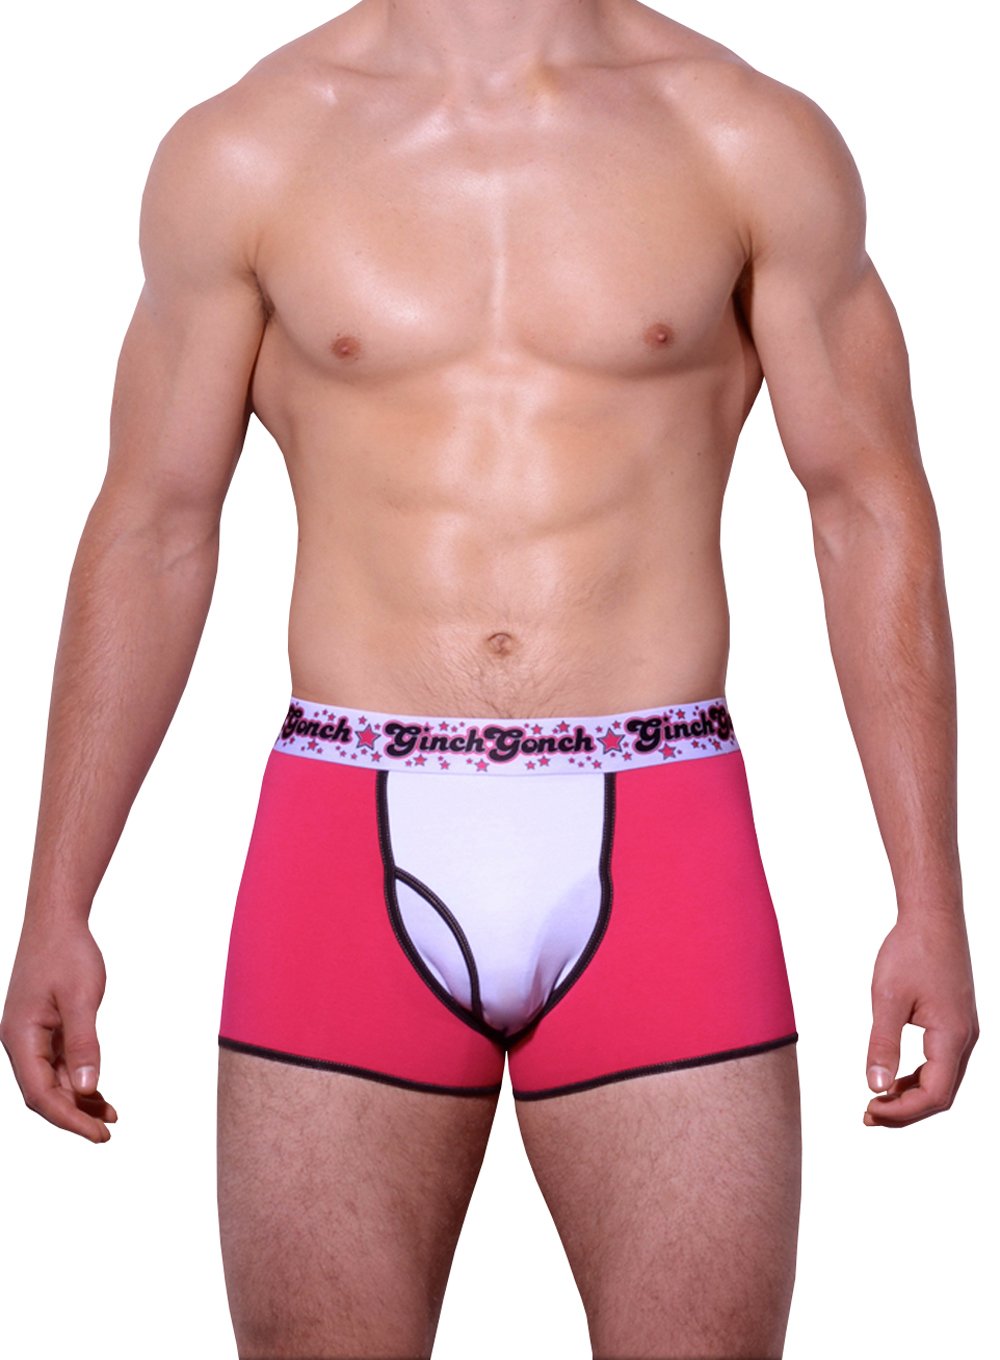 GG Ginch Gonch Mean Pink men's boxer brief trunk underwear, y front with pink and white panels and black trim with black, white, and pink printed waistband front 